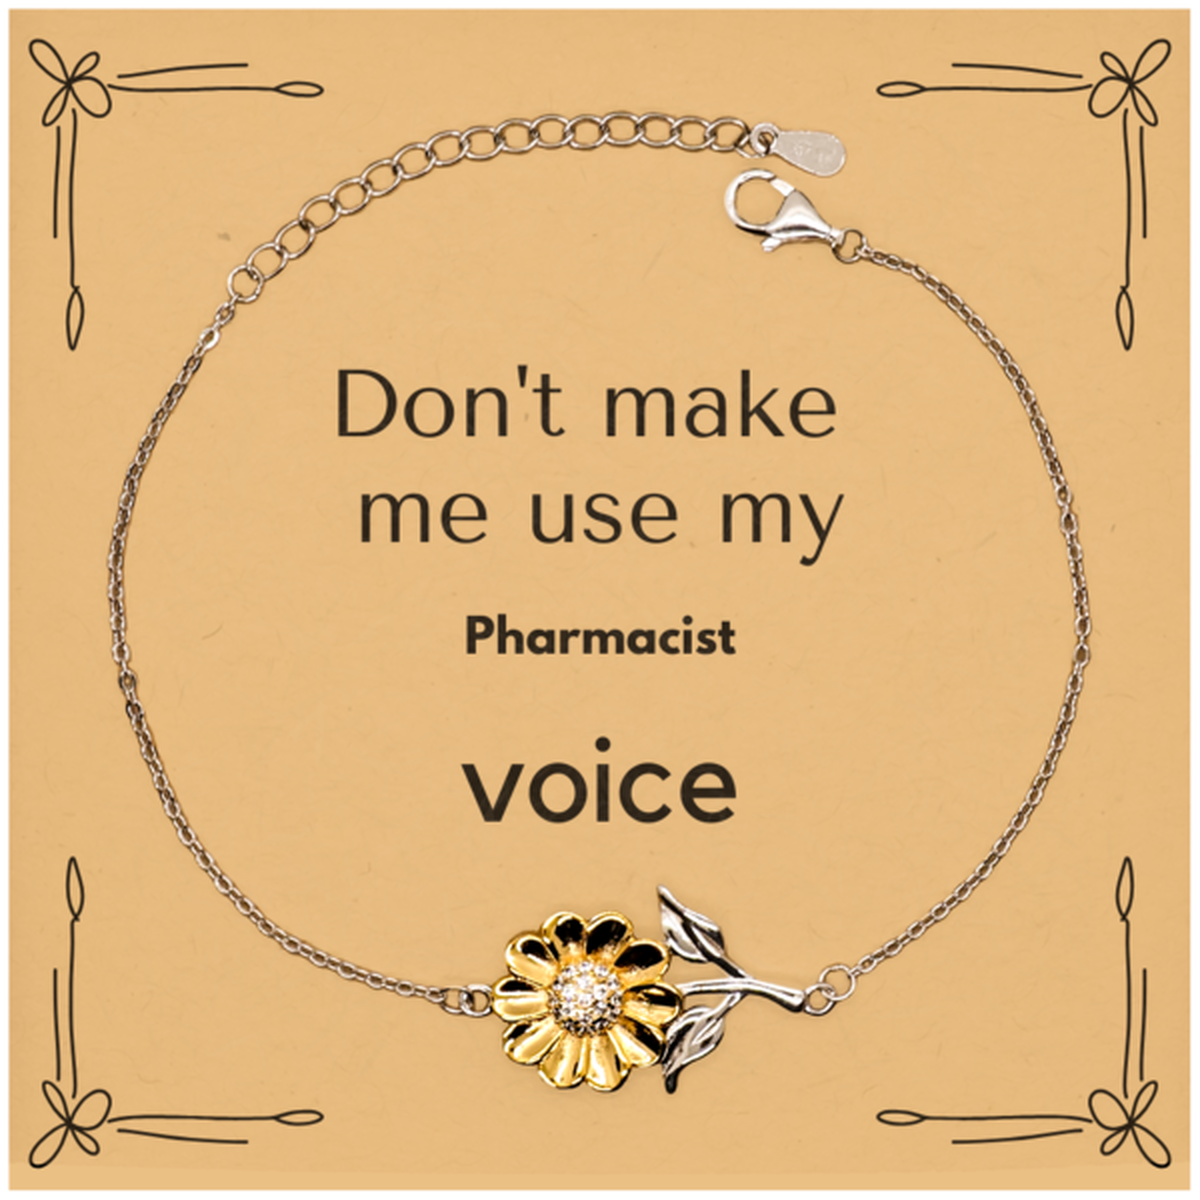 Don't make me use my Pharmacist voice, Sarcasm Pharmacist Card Gifts, Christmas Pharmacist Sunflower Bracelet Birthday Unique Gifts For Pharmacist Coworkers, Men, Women, Colleague, Friends